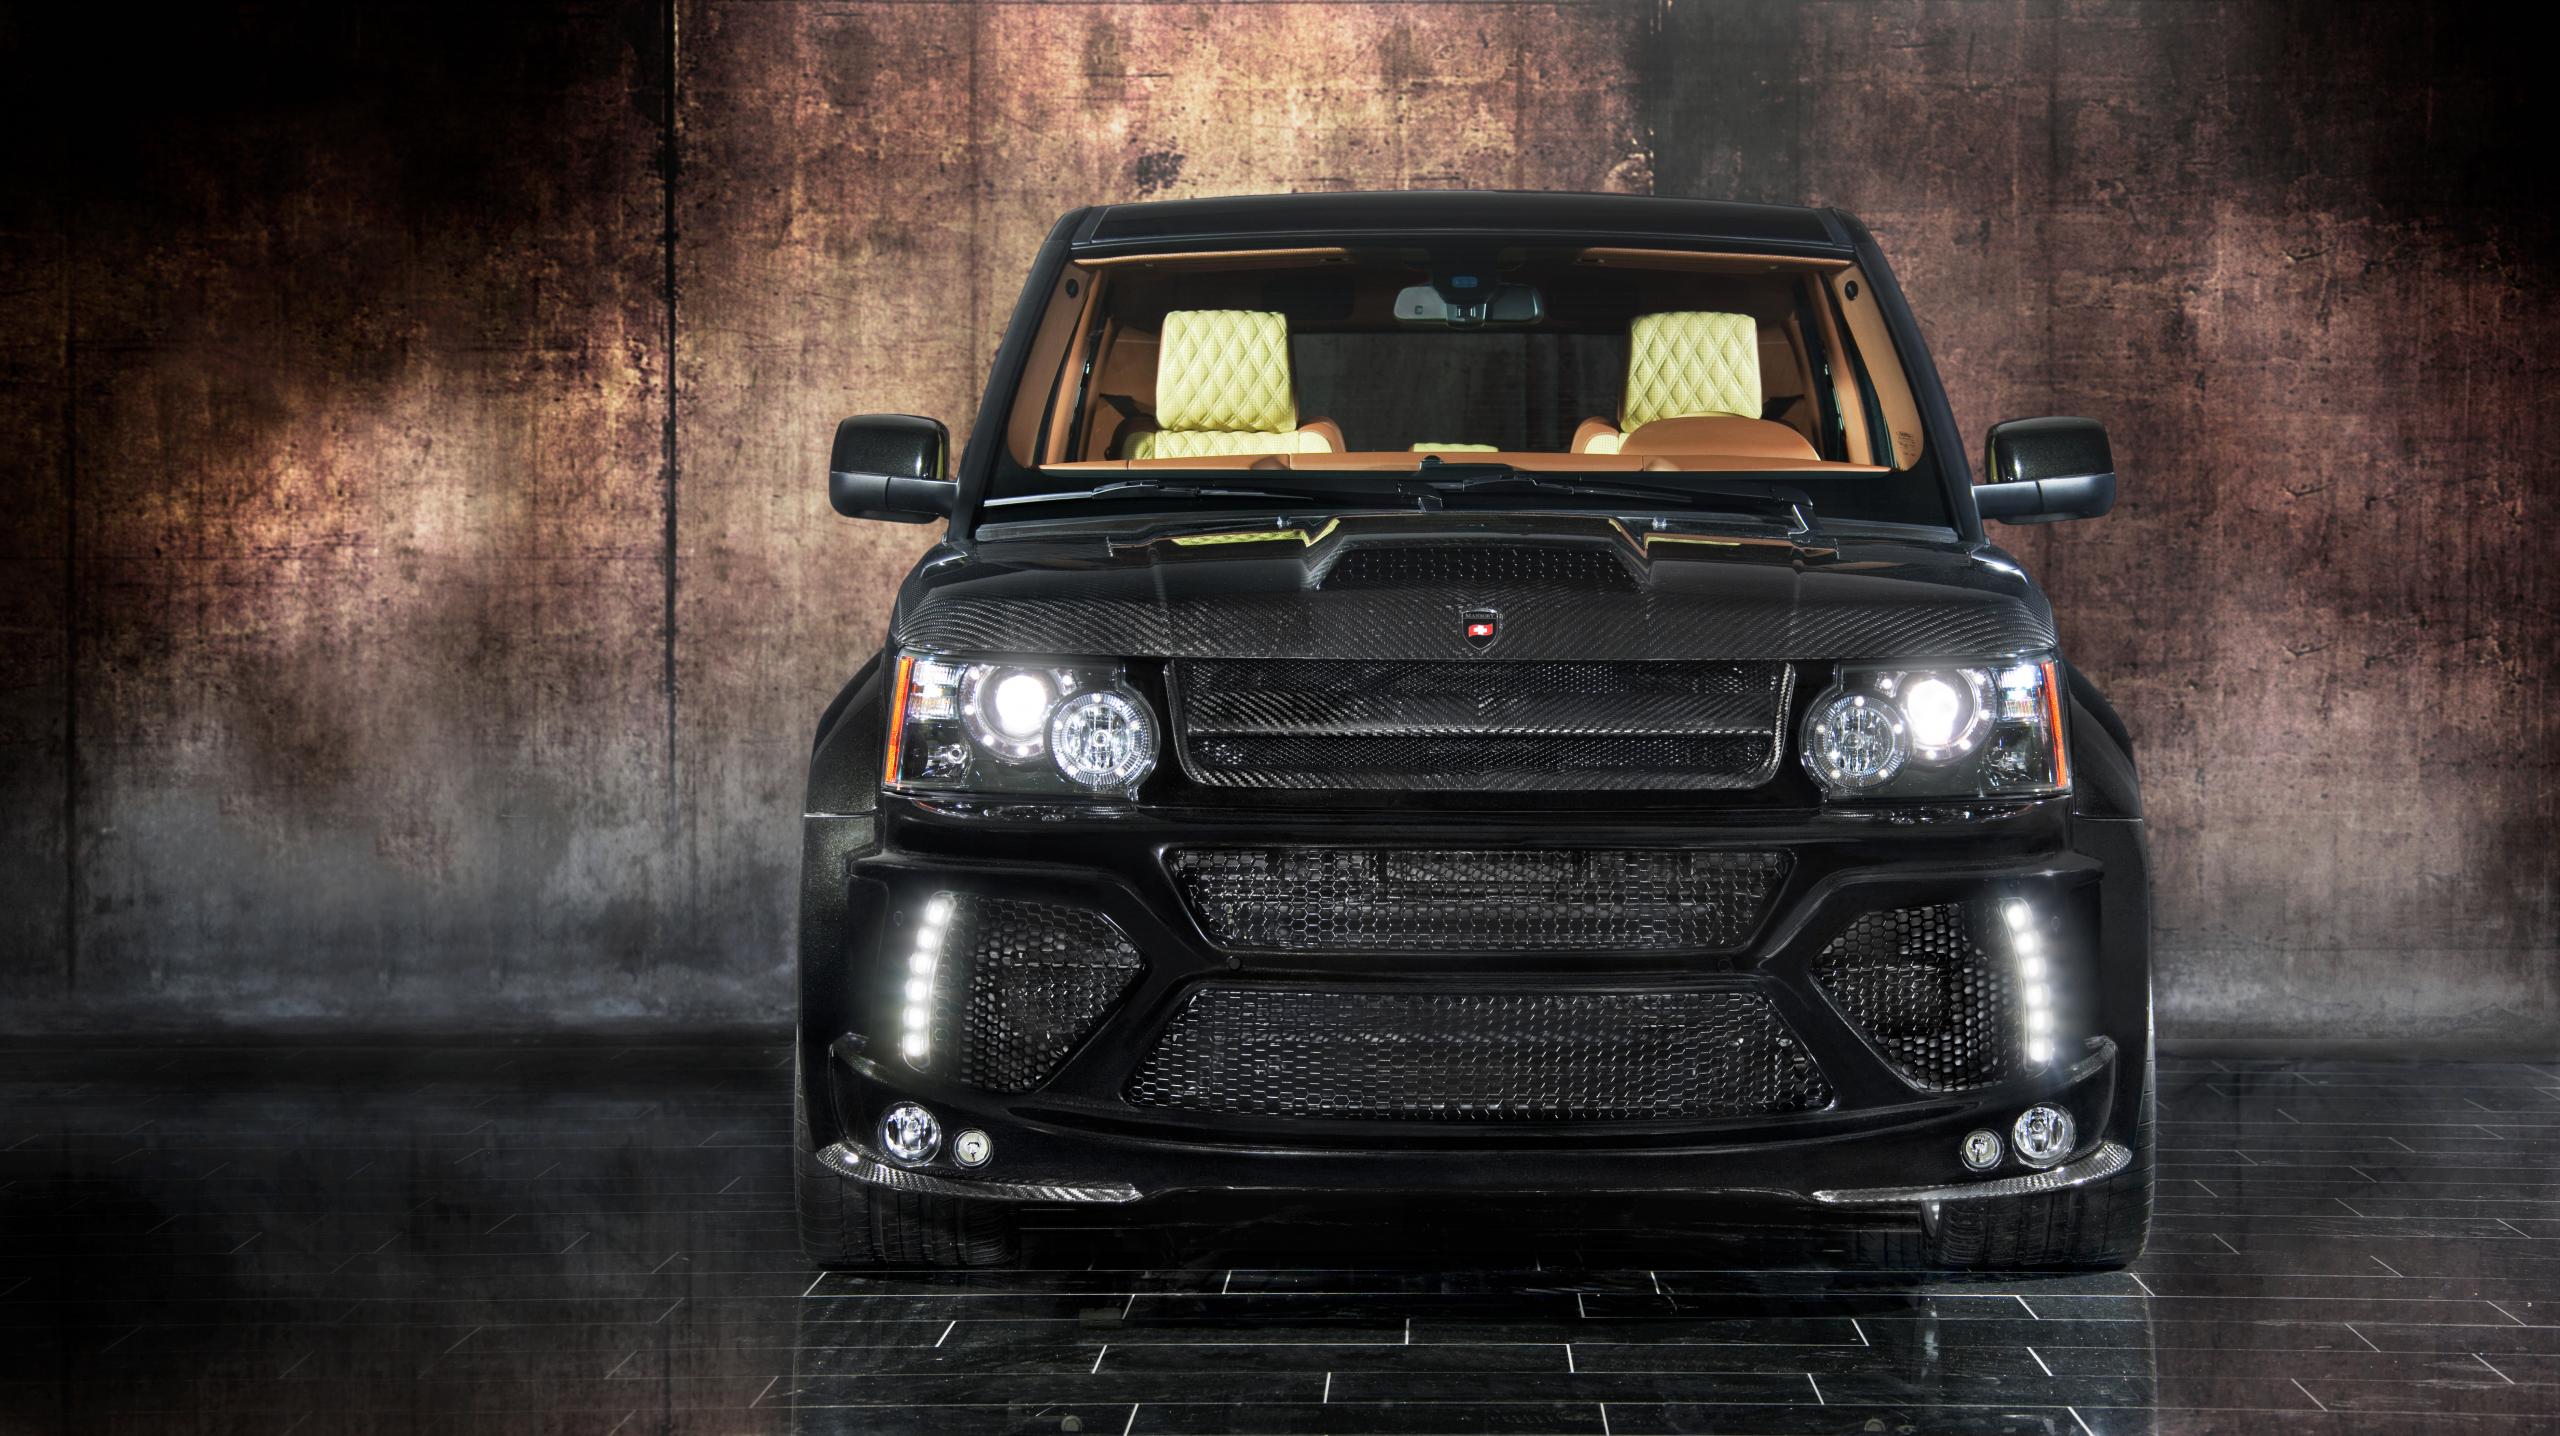 Mansory Carbon Fiber Body Kit Set For Land Rover Range Rover Sport Buy With Delivery